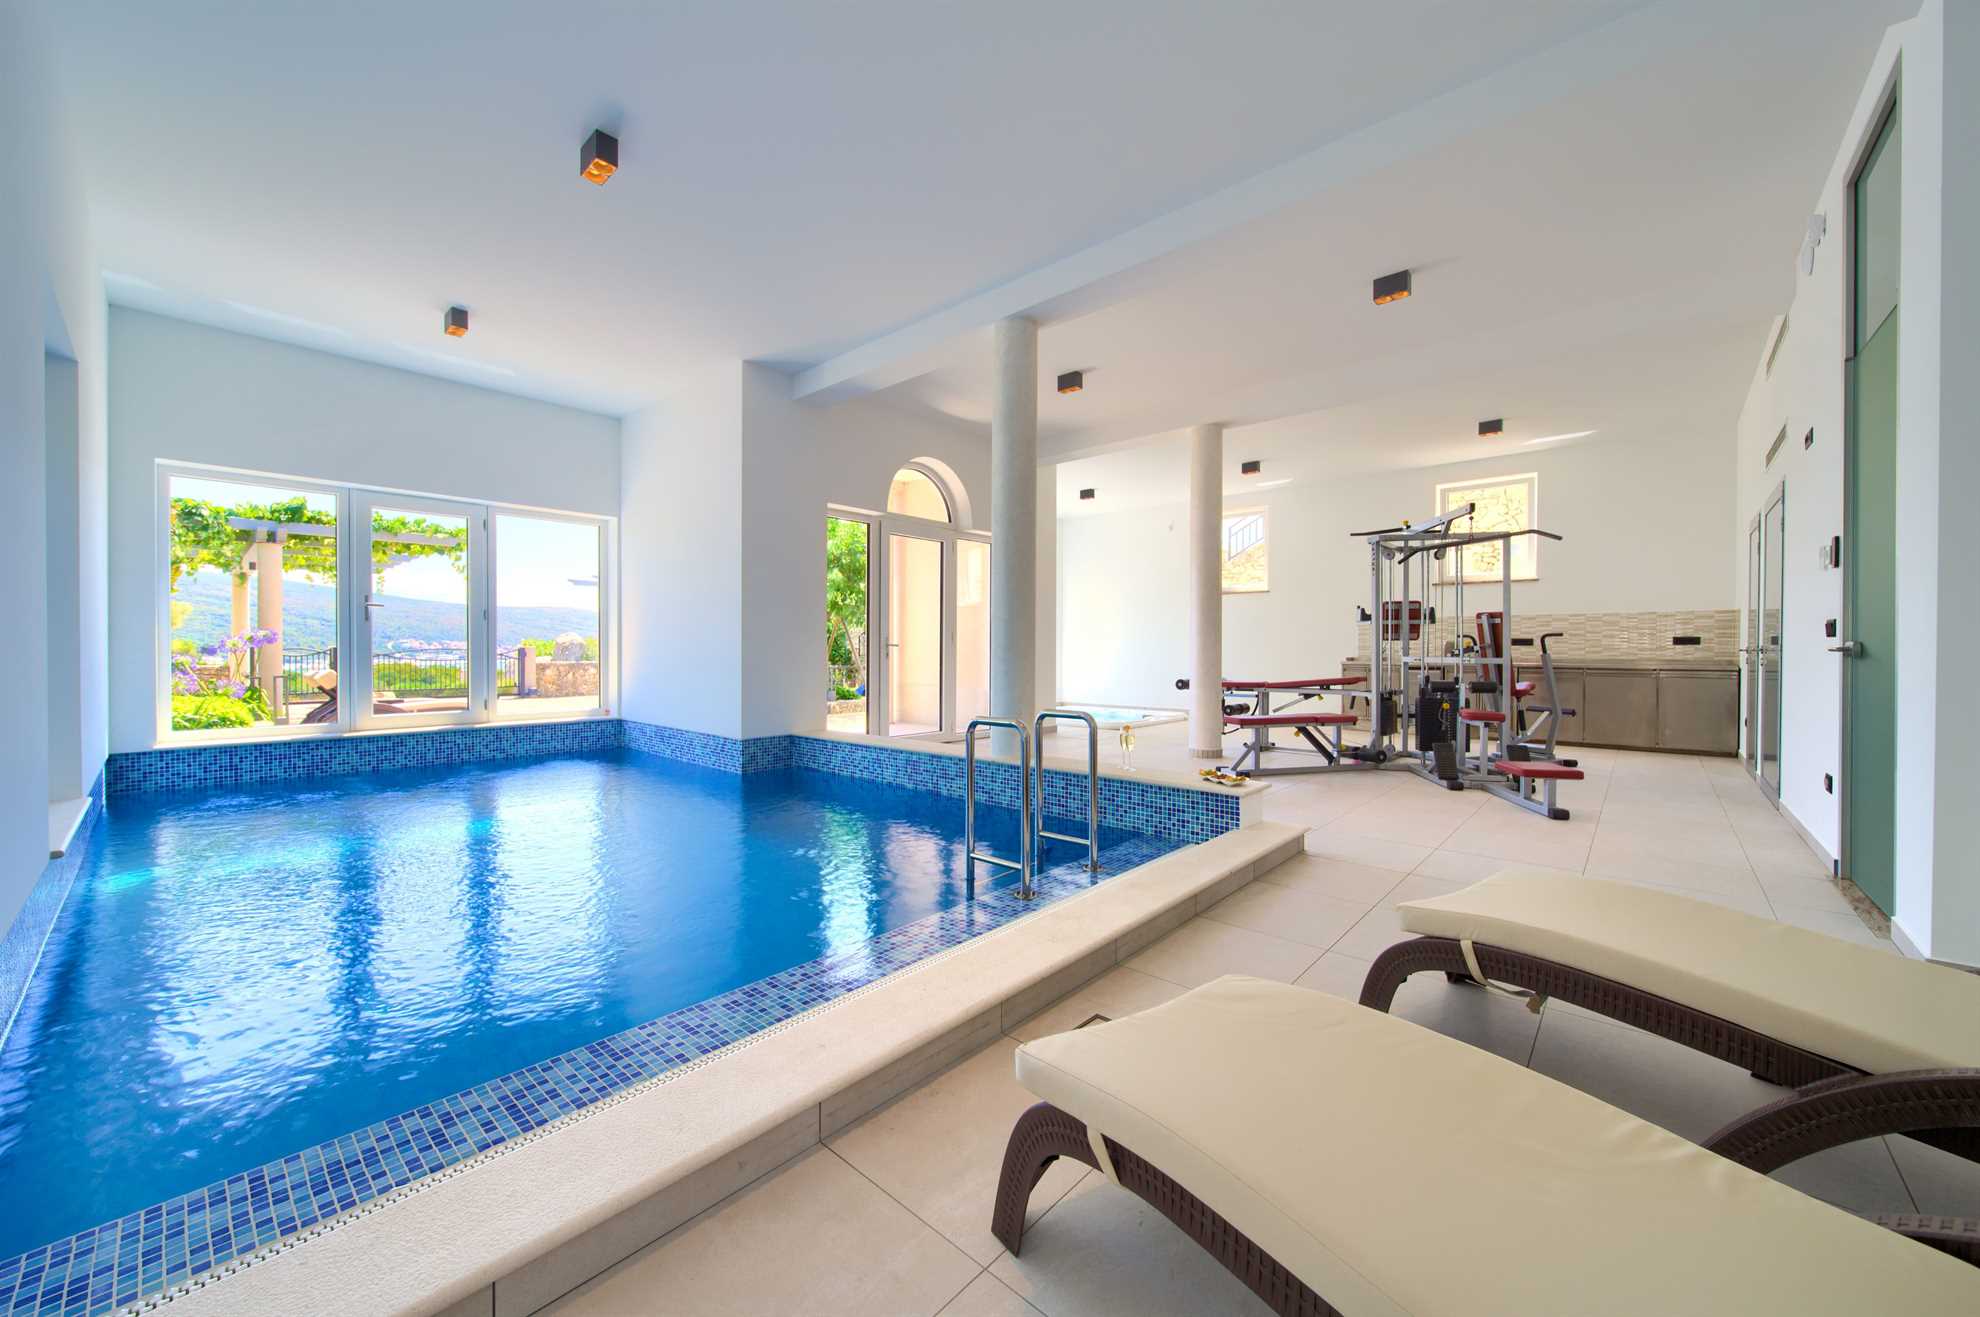 Room in an apartment with a swimming pool and gym, with access to a terrace overlooking the sea